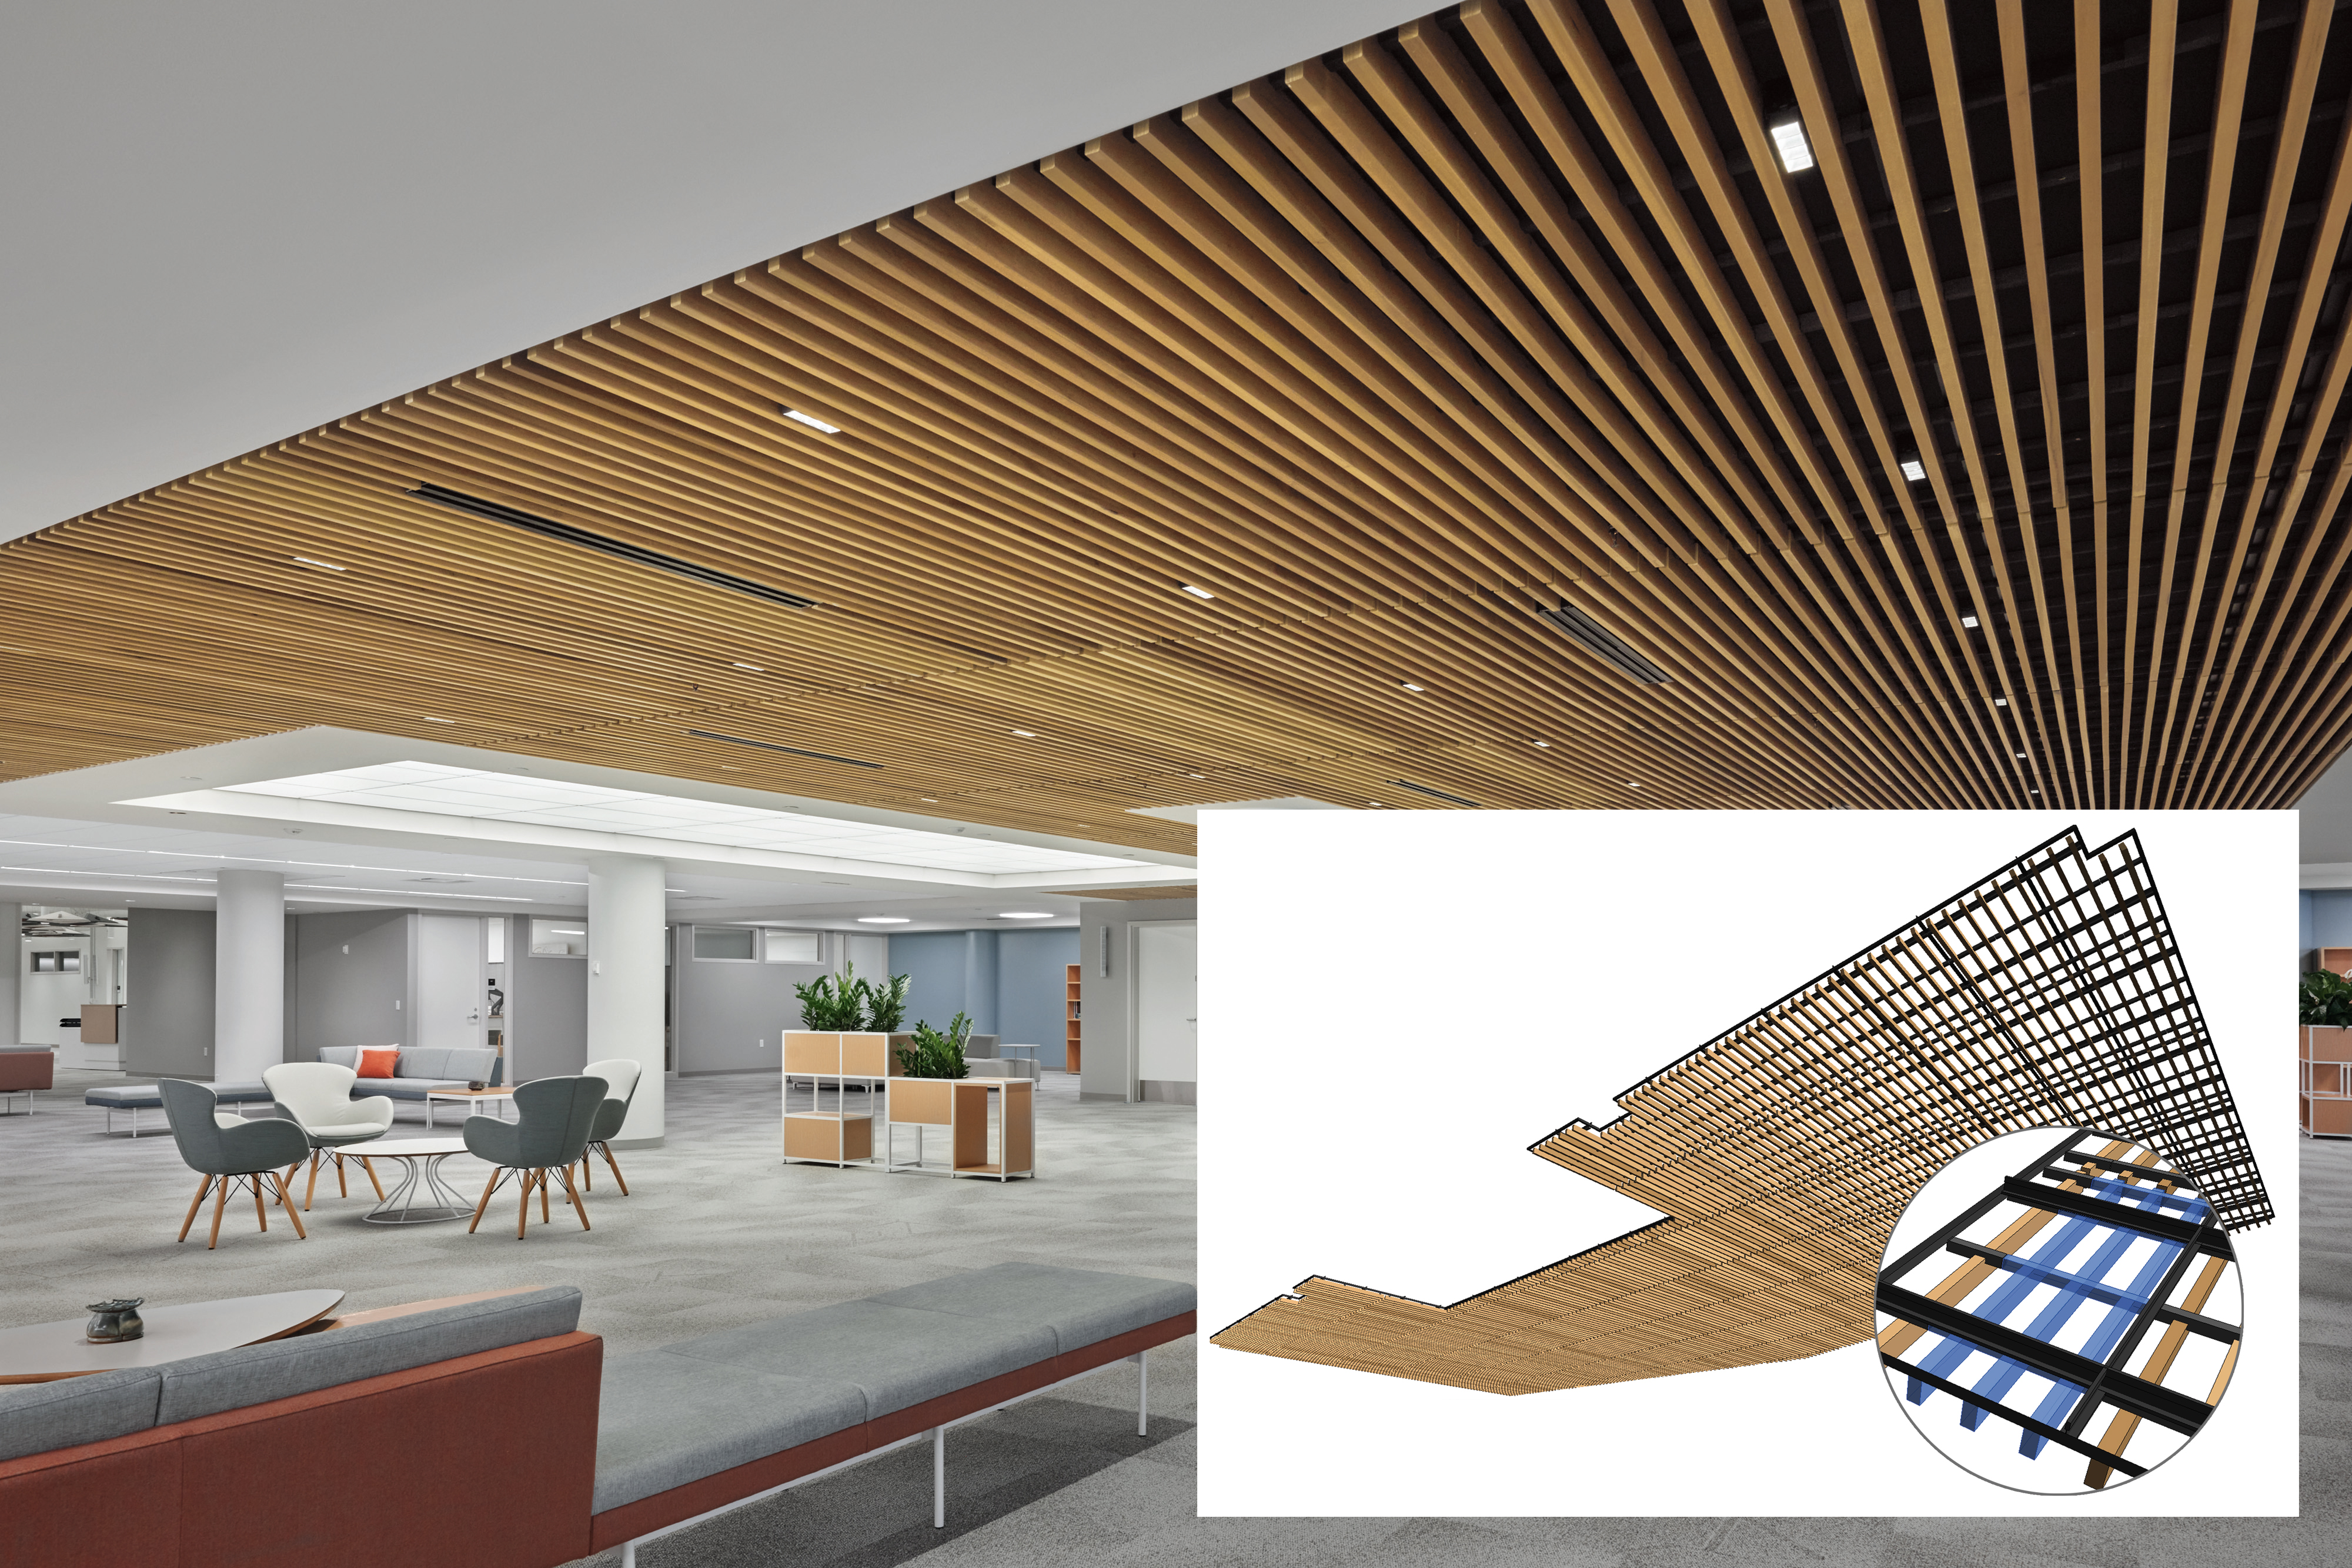 Armstrong Revit Models For Ceiling